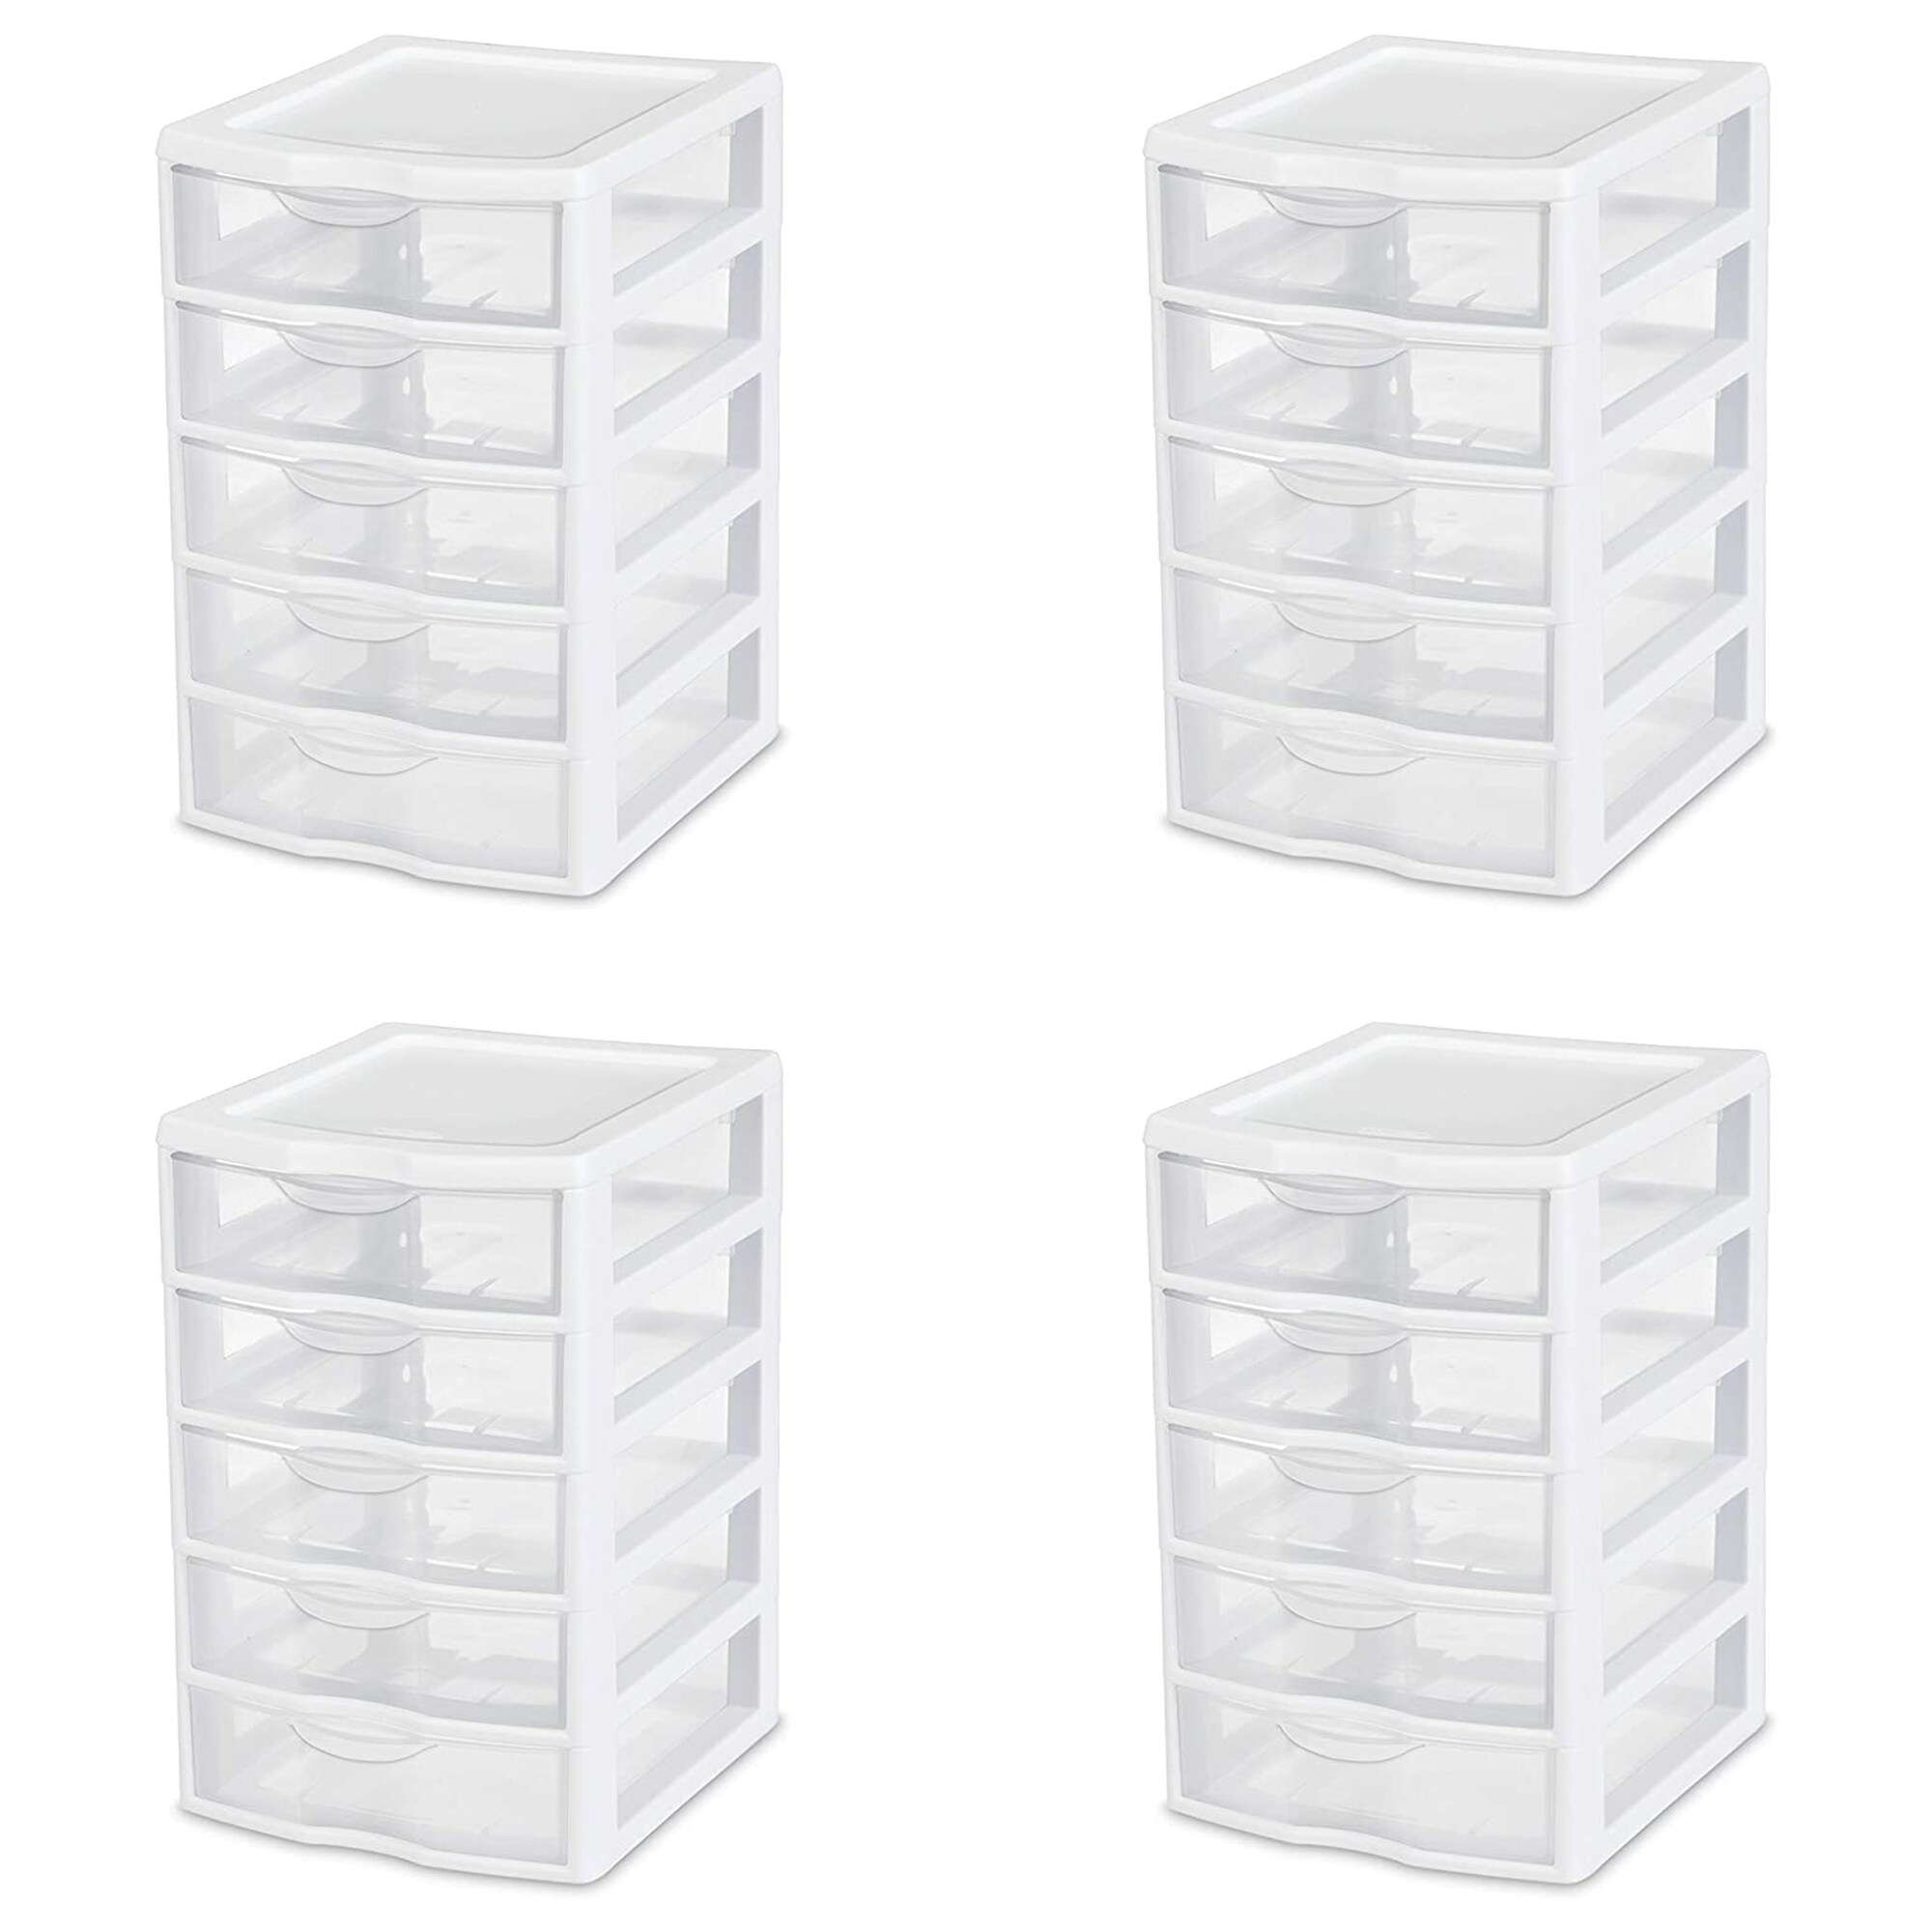 Life Story Classic White 3 Shelf Home Storage Container Organizer Plastic  Drawers with Wheels for Closet, Dorm, or Office